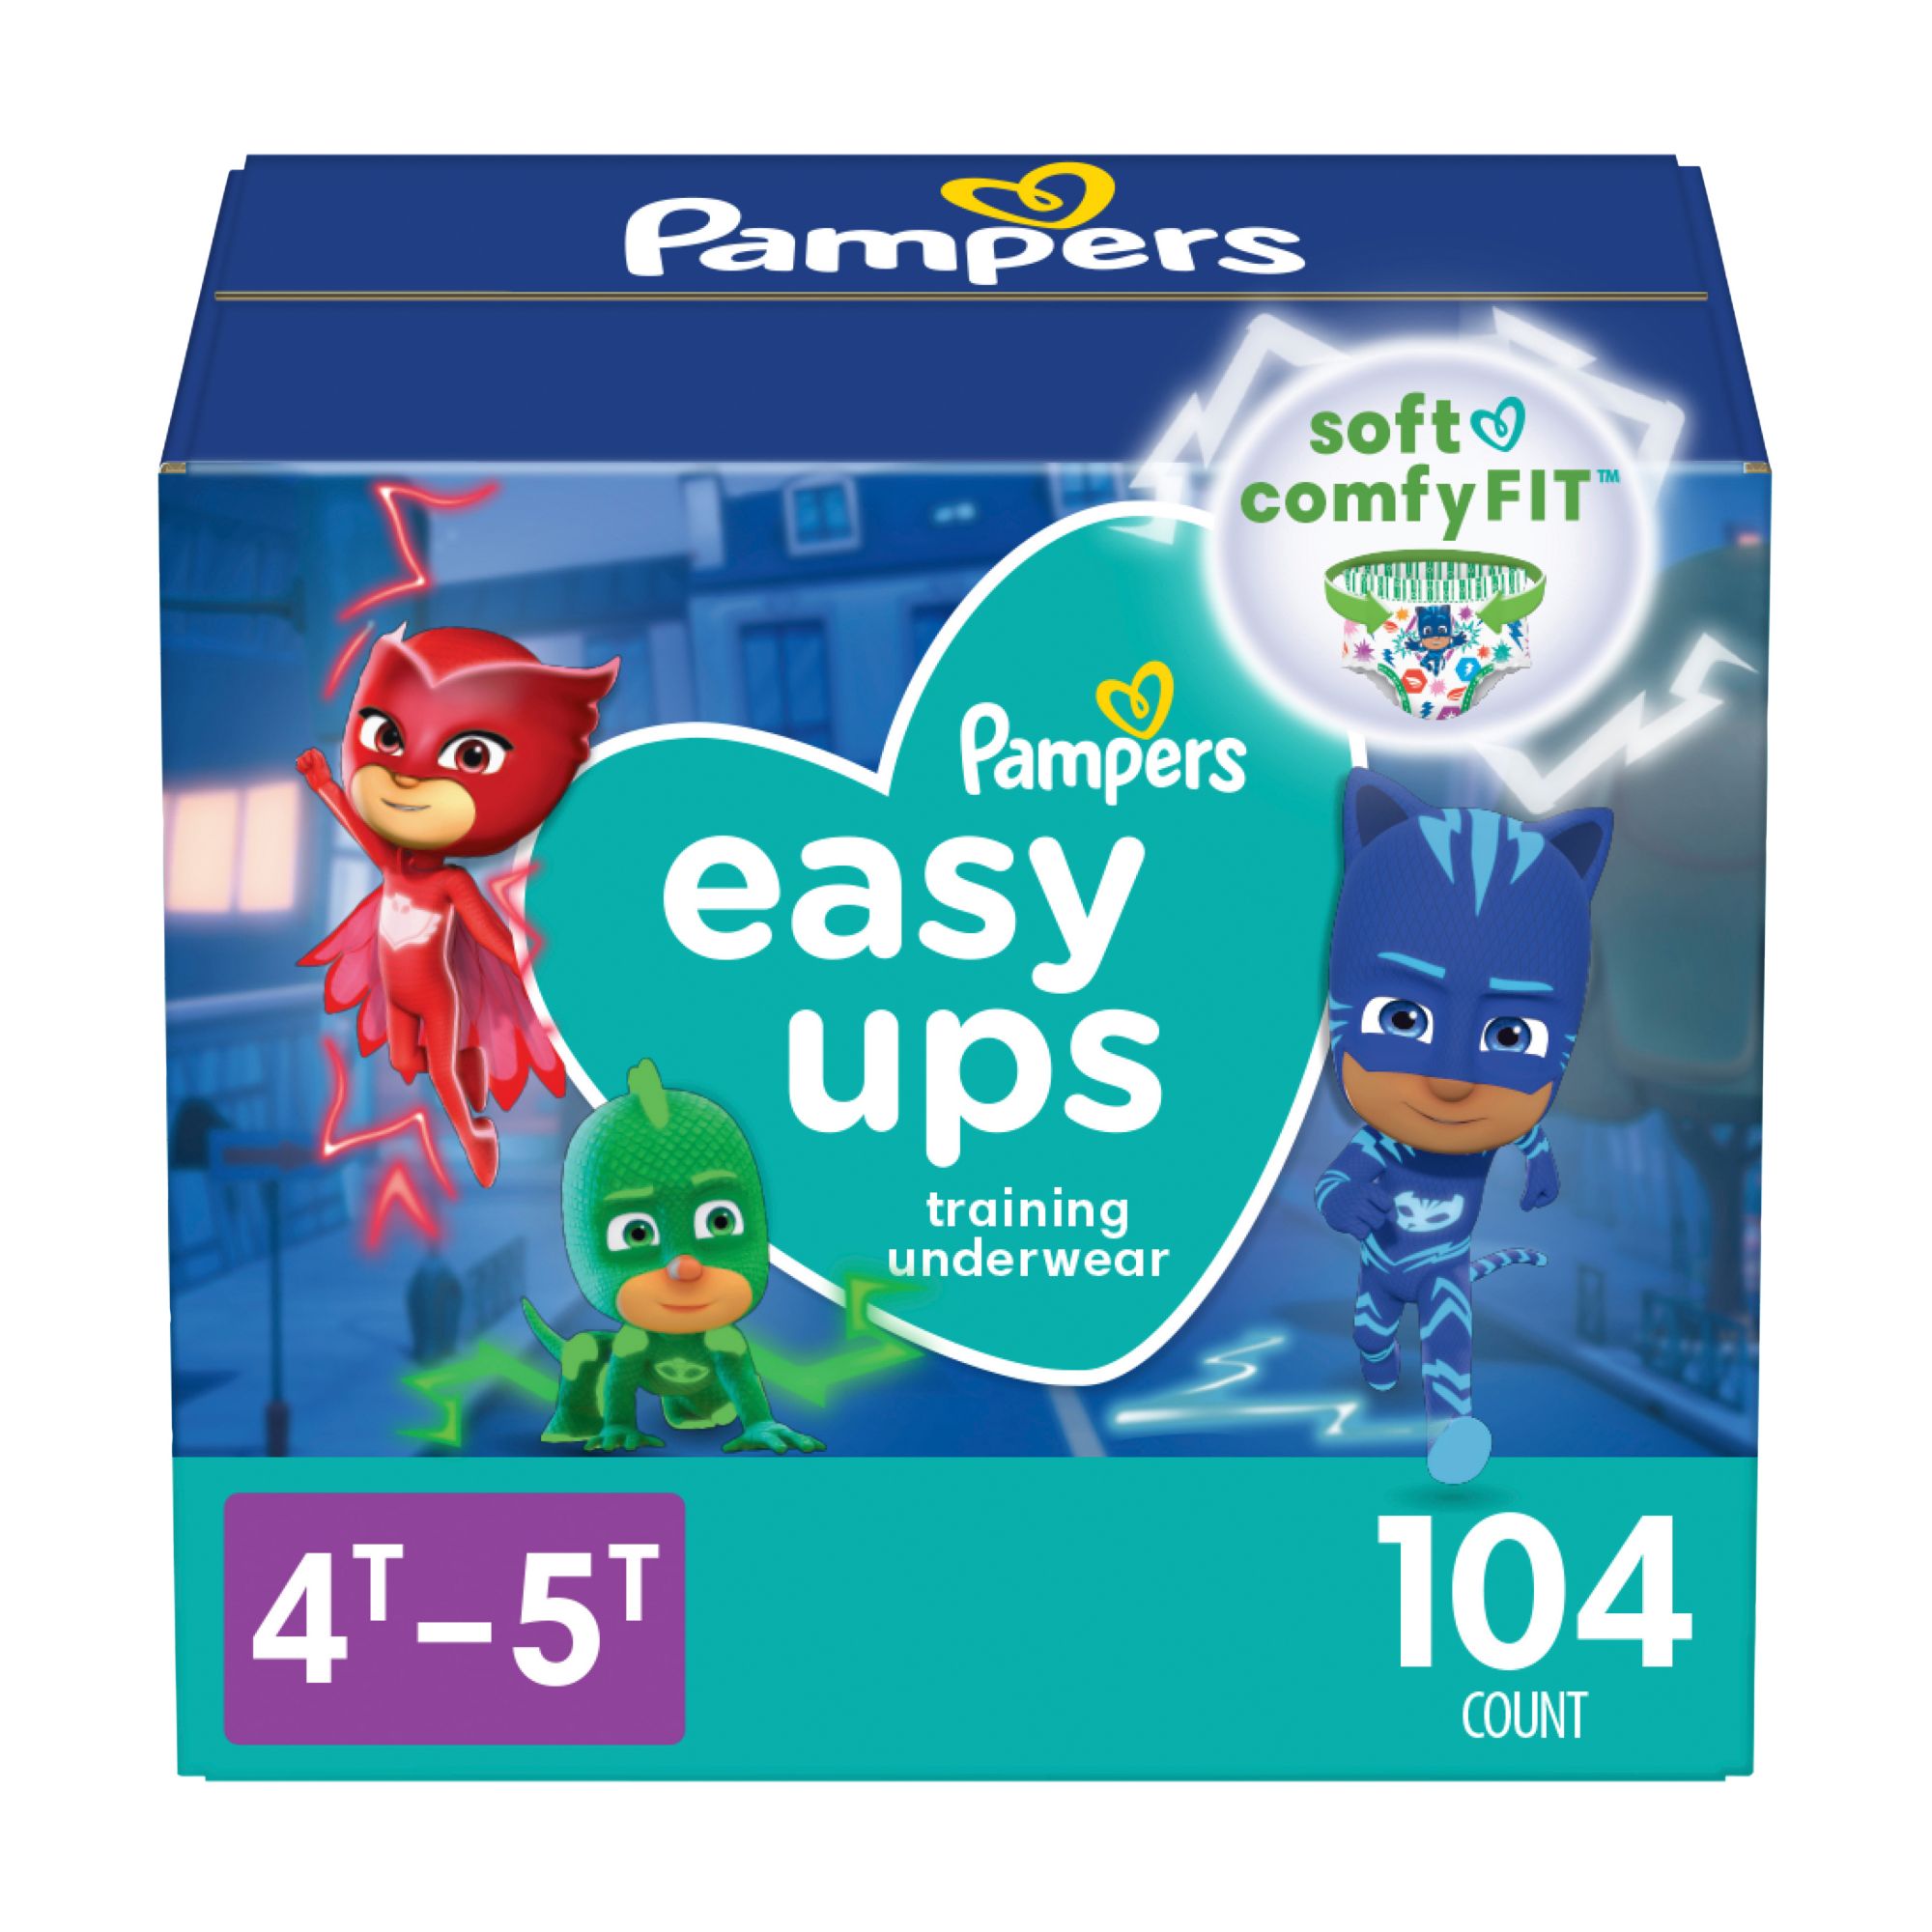 Pampers Easy Ups Training Underwear for Boys, 4T-5T (104 ct.)